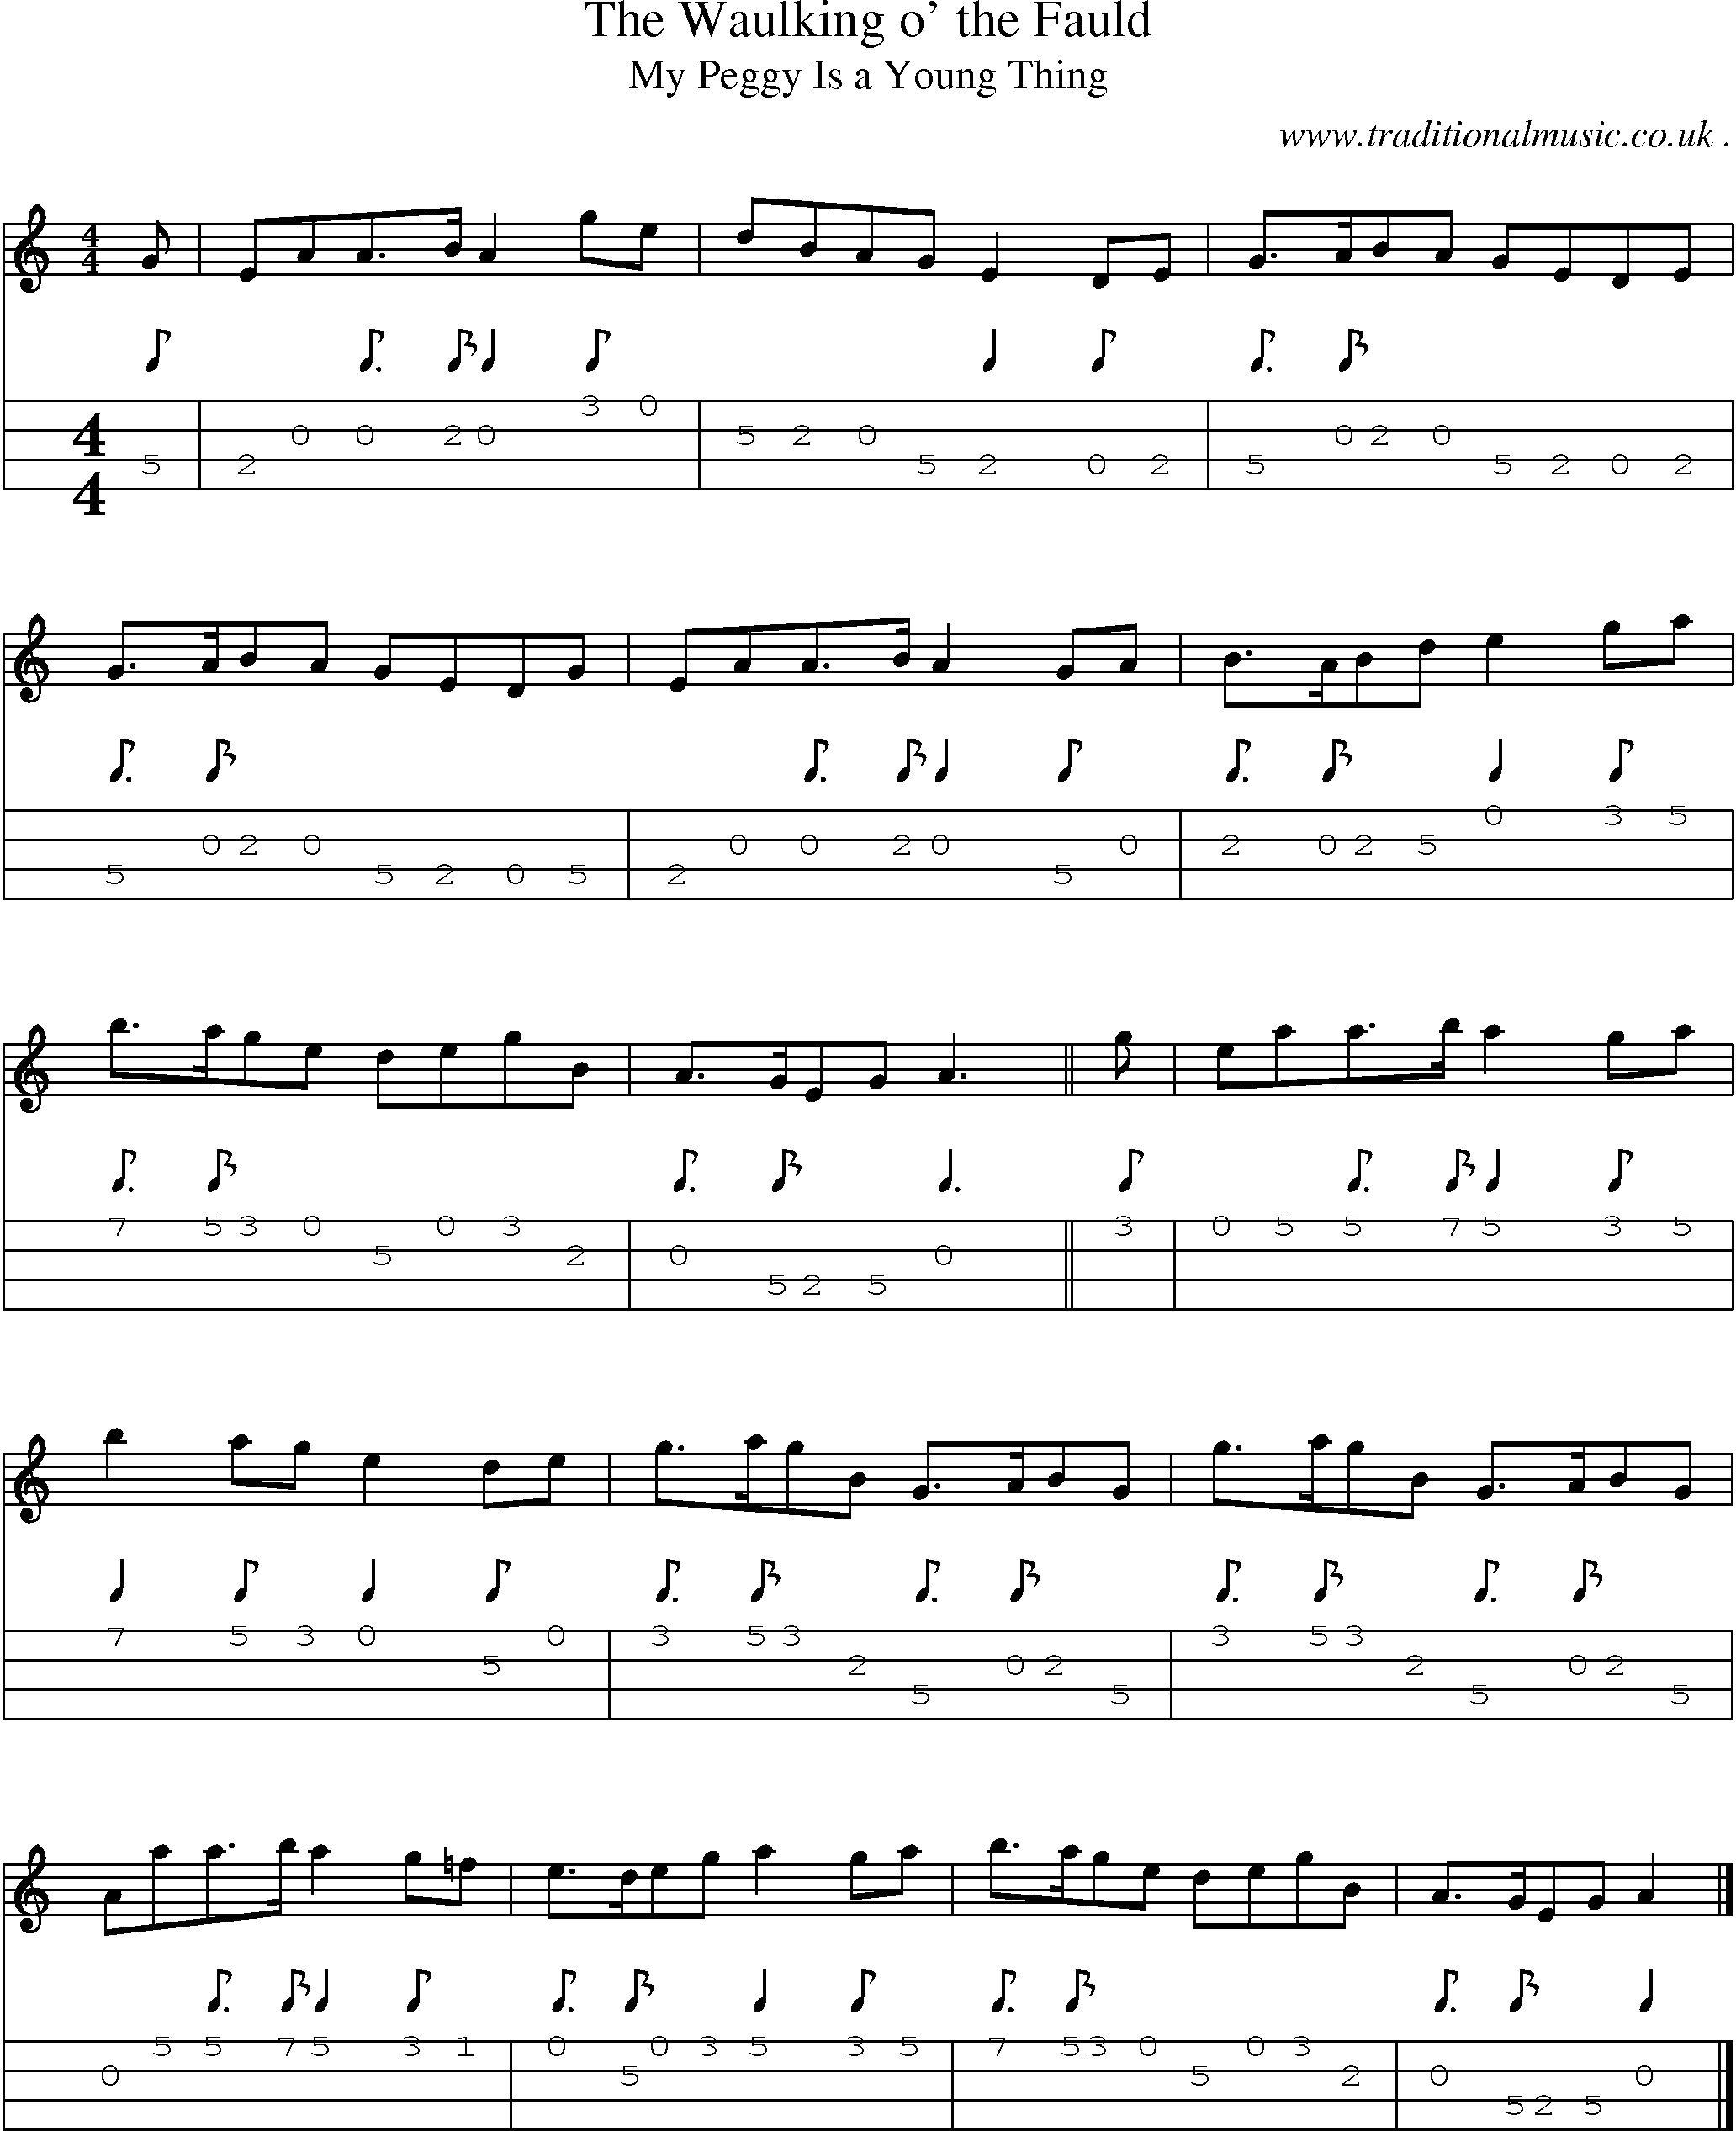 Sheet-music  score, Chords and Mandolin Tabs for The Waulking O The Fauld